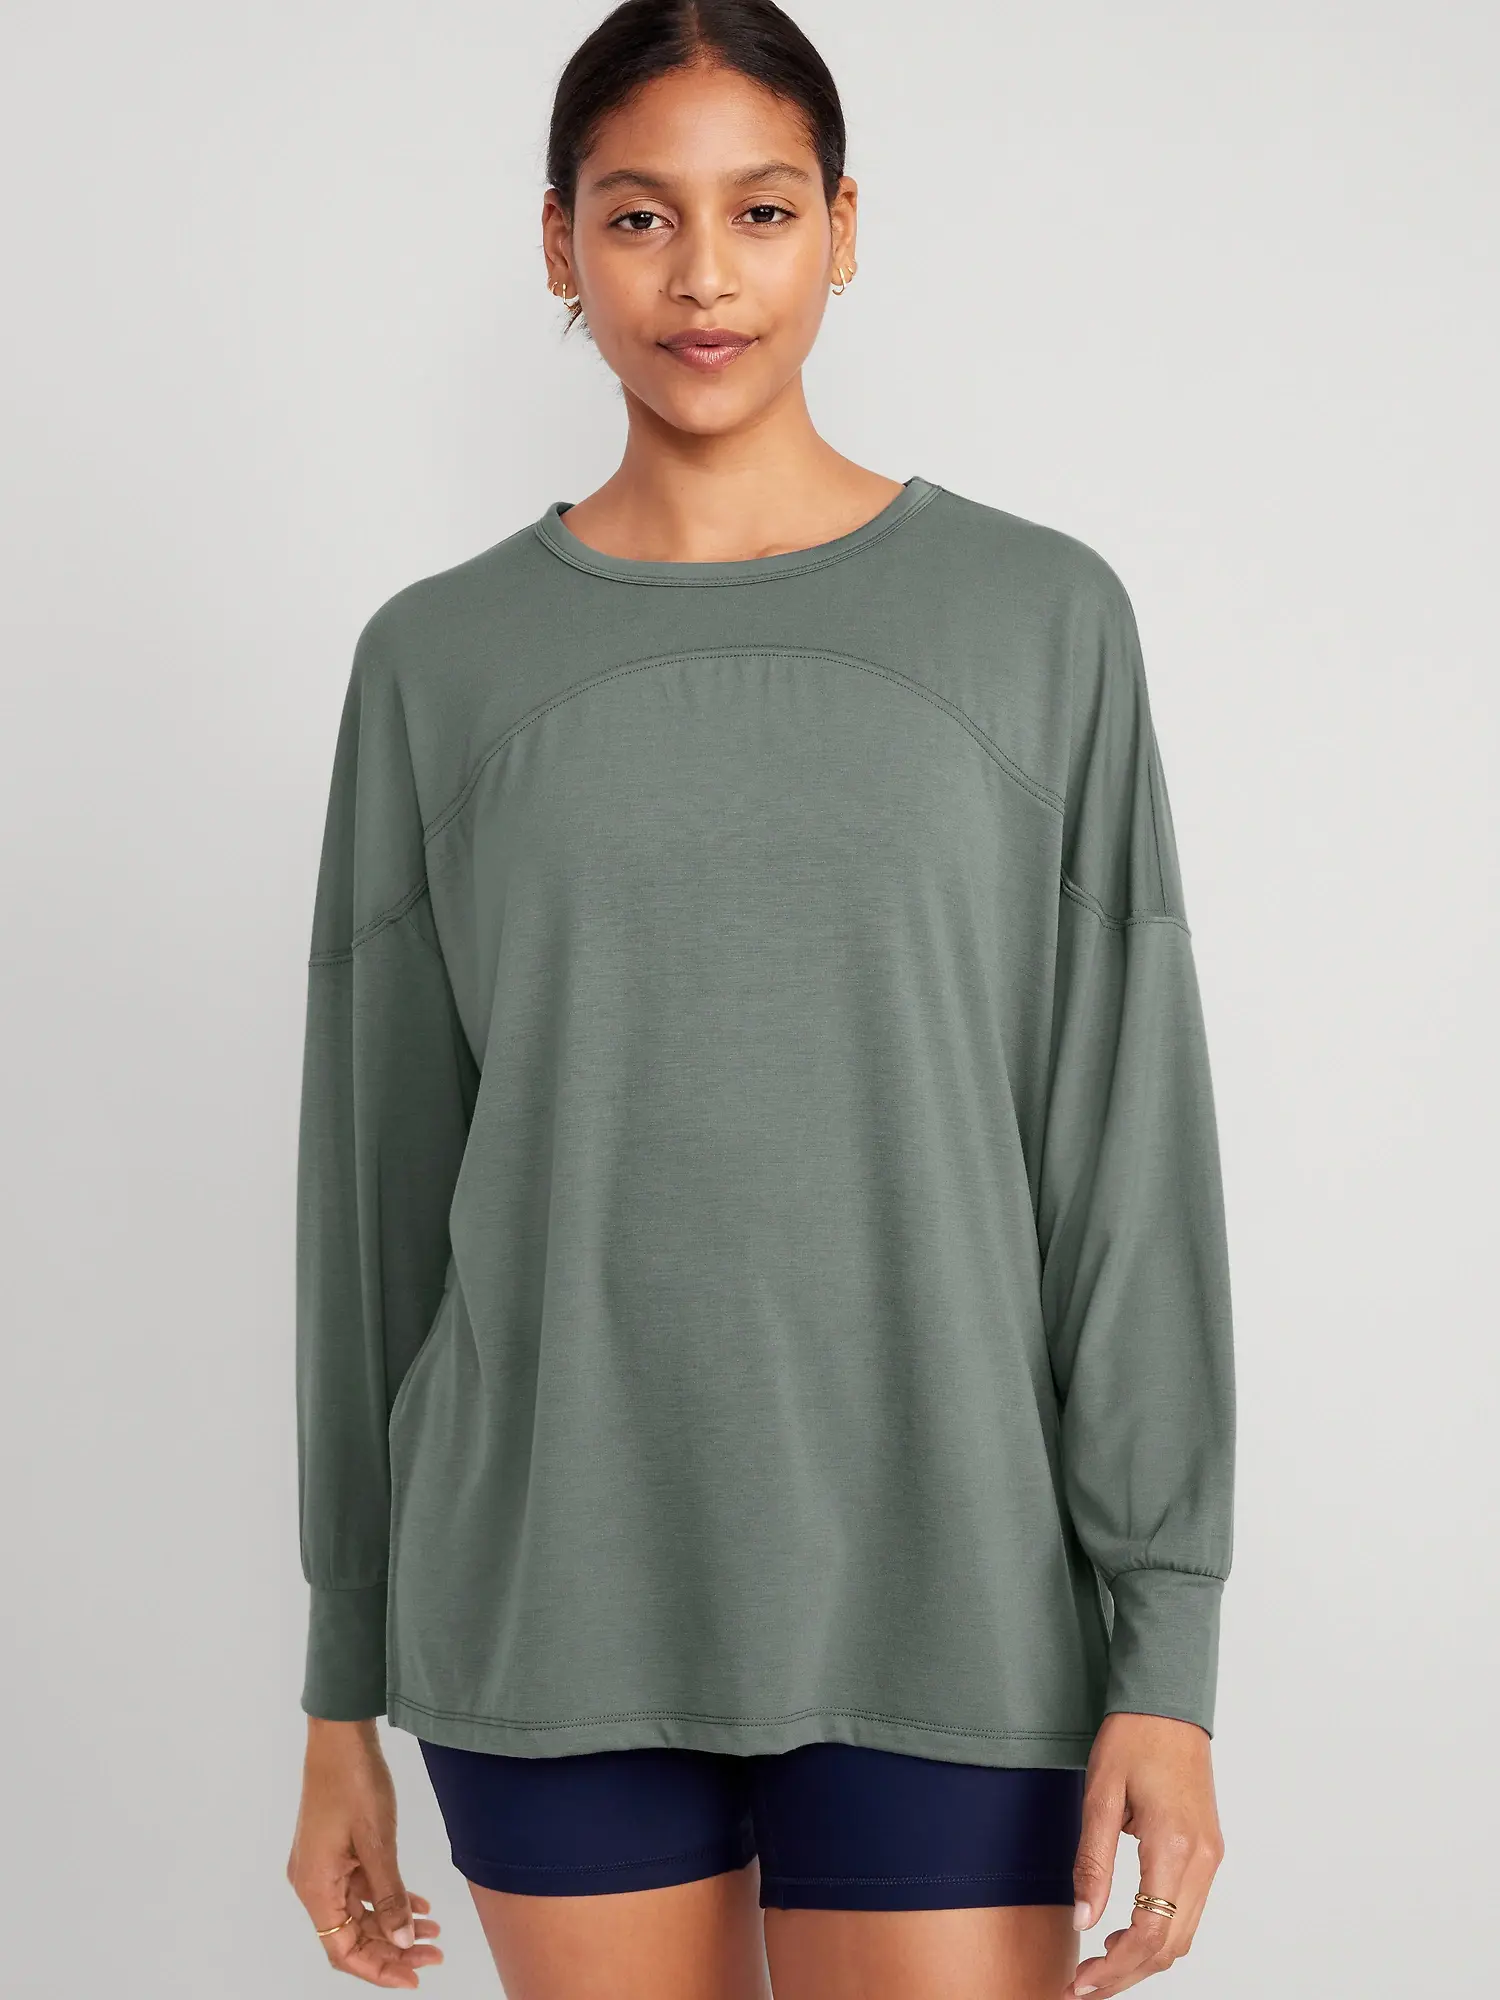 Old Navy Oversized UltraLite All-Day Performance Tunic for Women green. 1